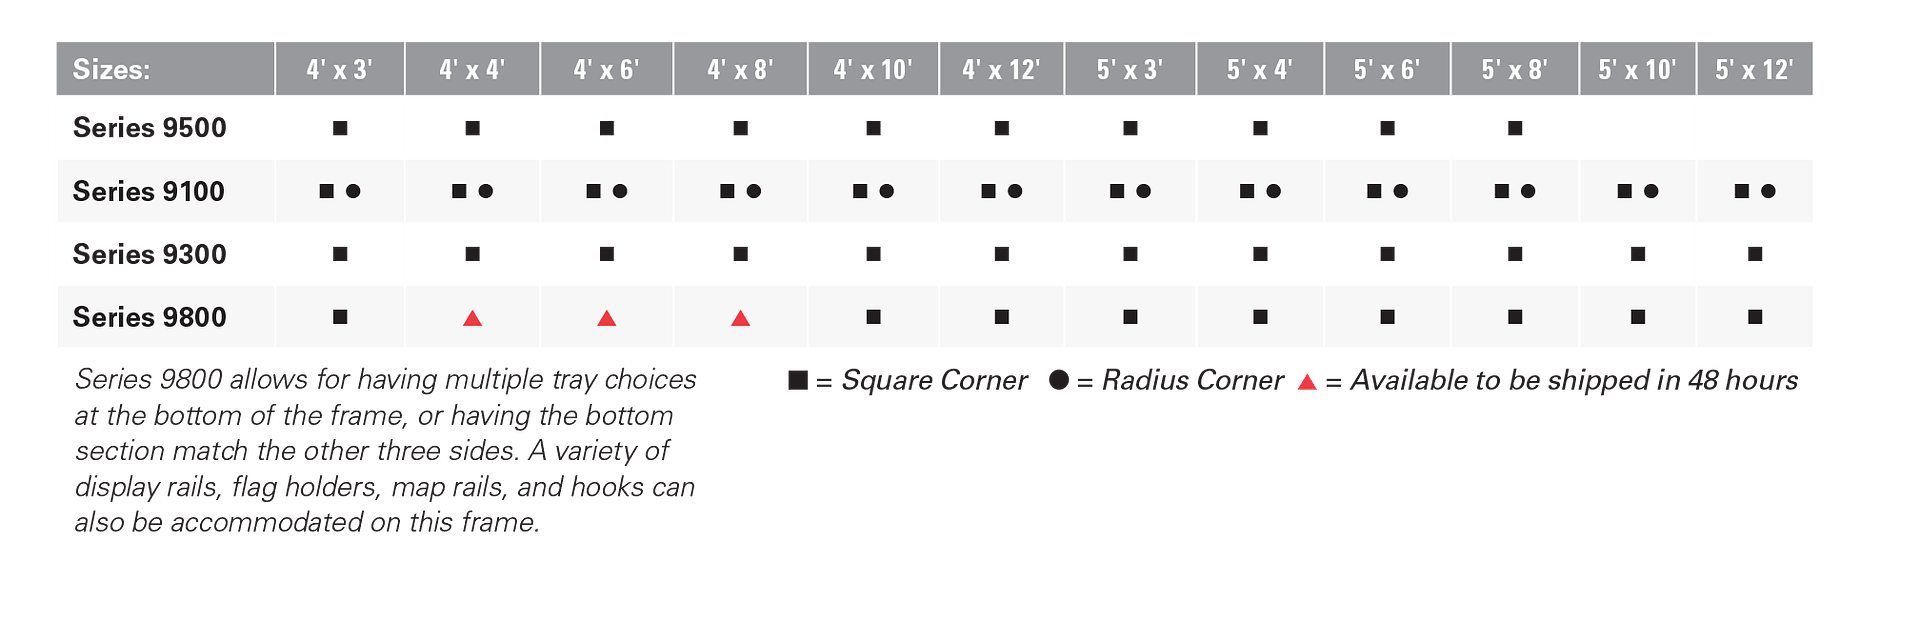 Standard Size Options Table